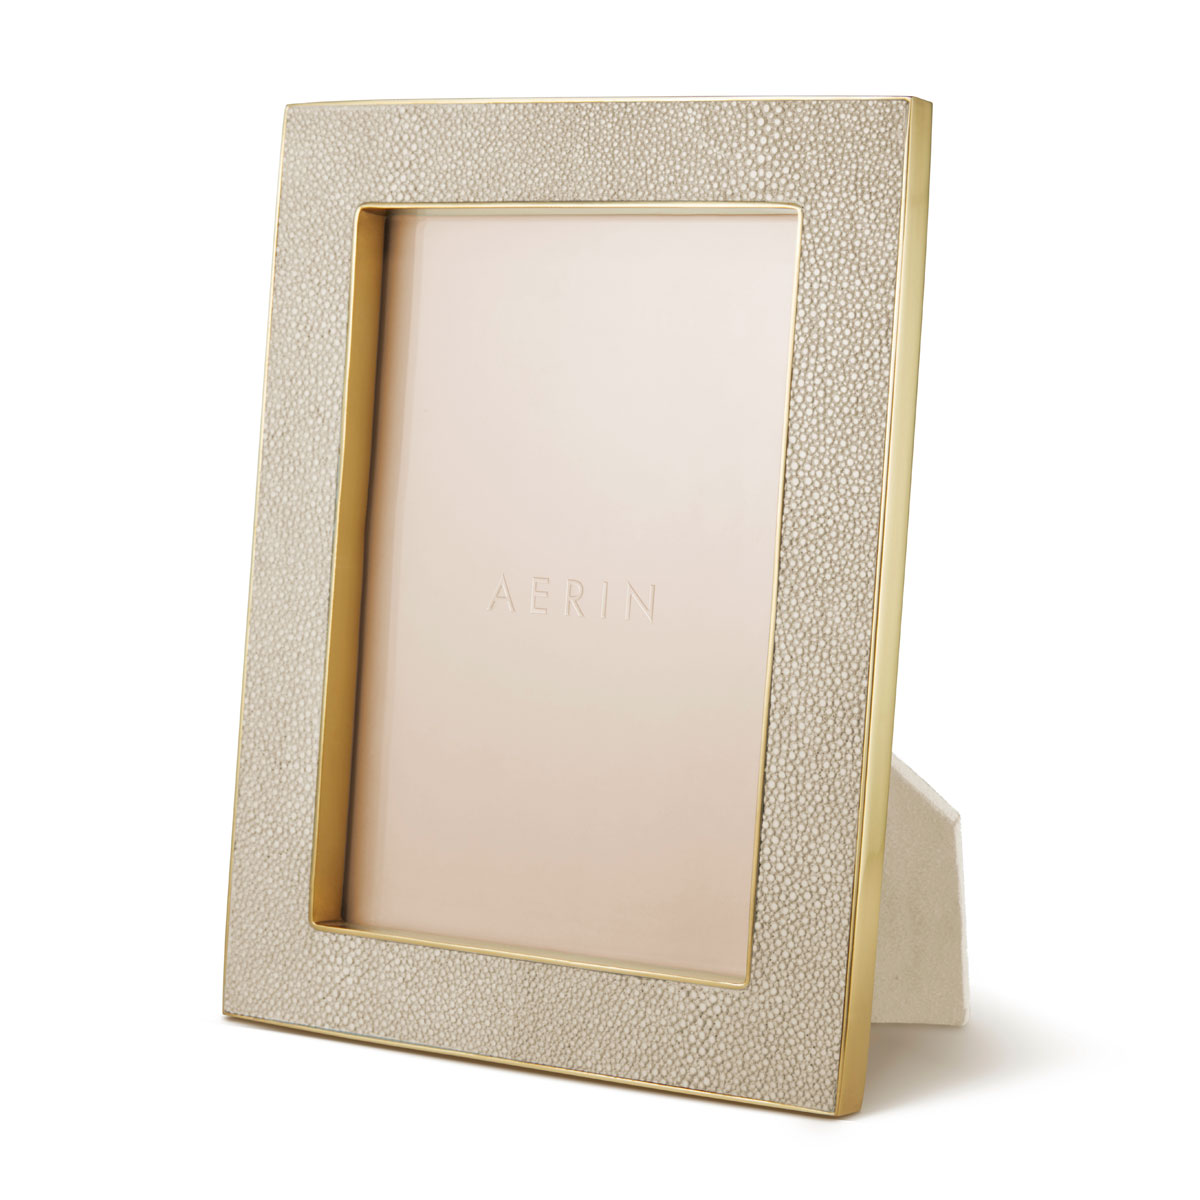 Aerin Classic Shagreen Wheat 5x7" Picture Frame